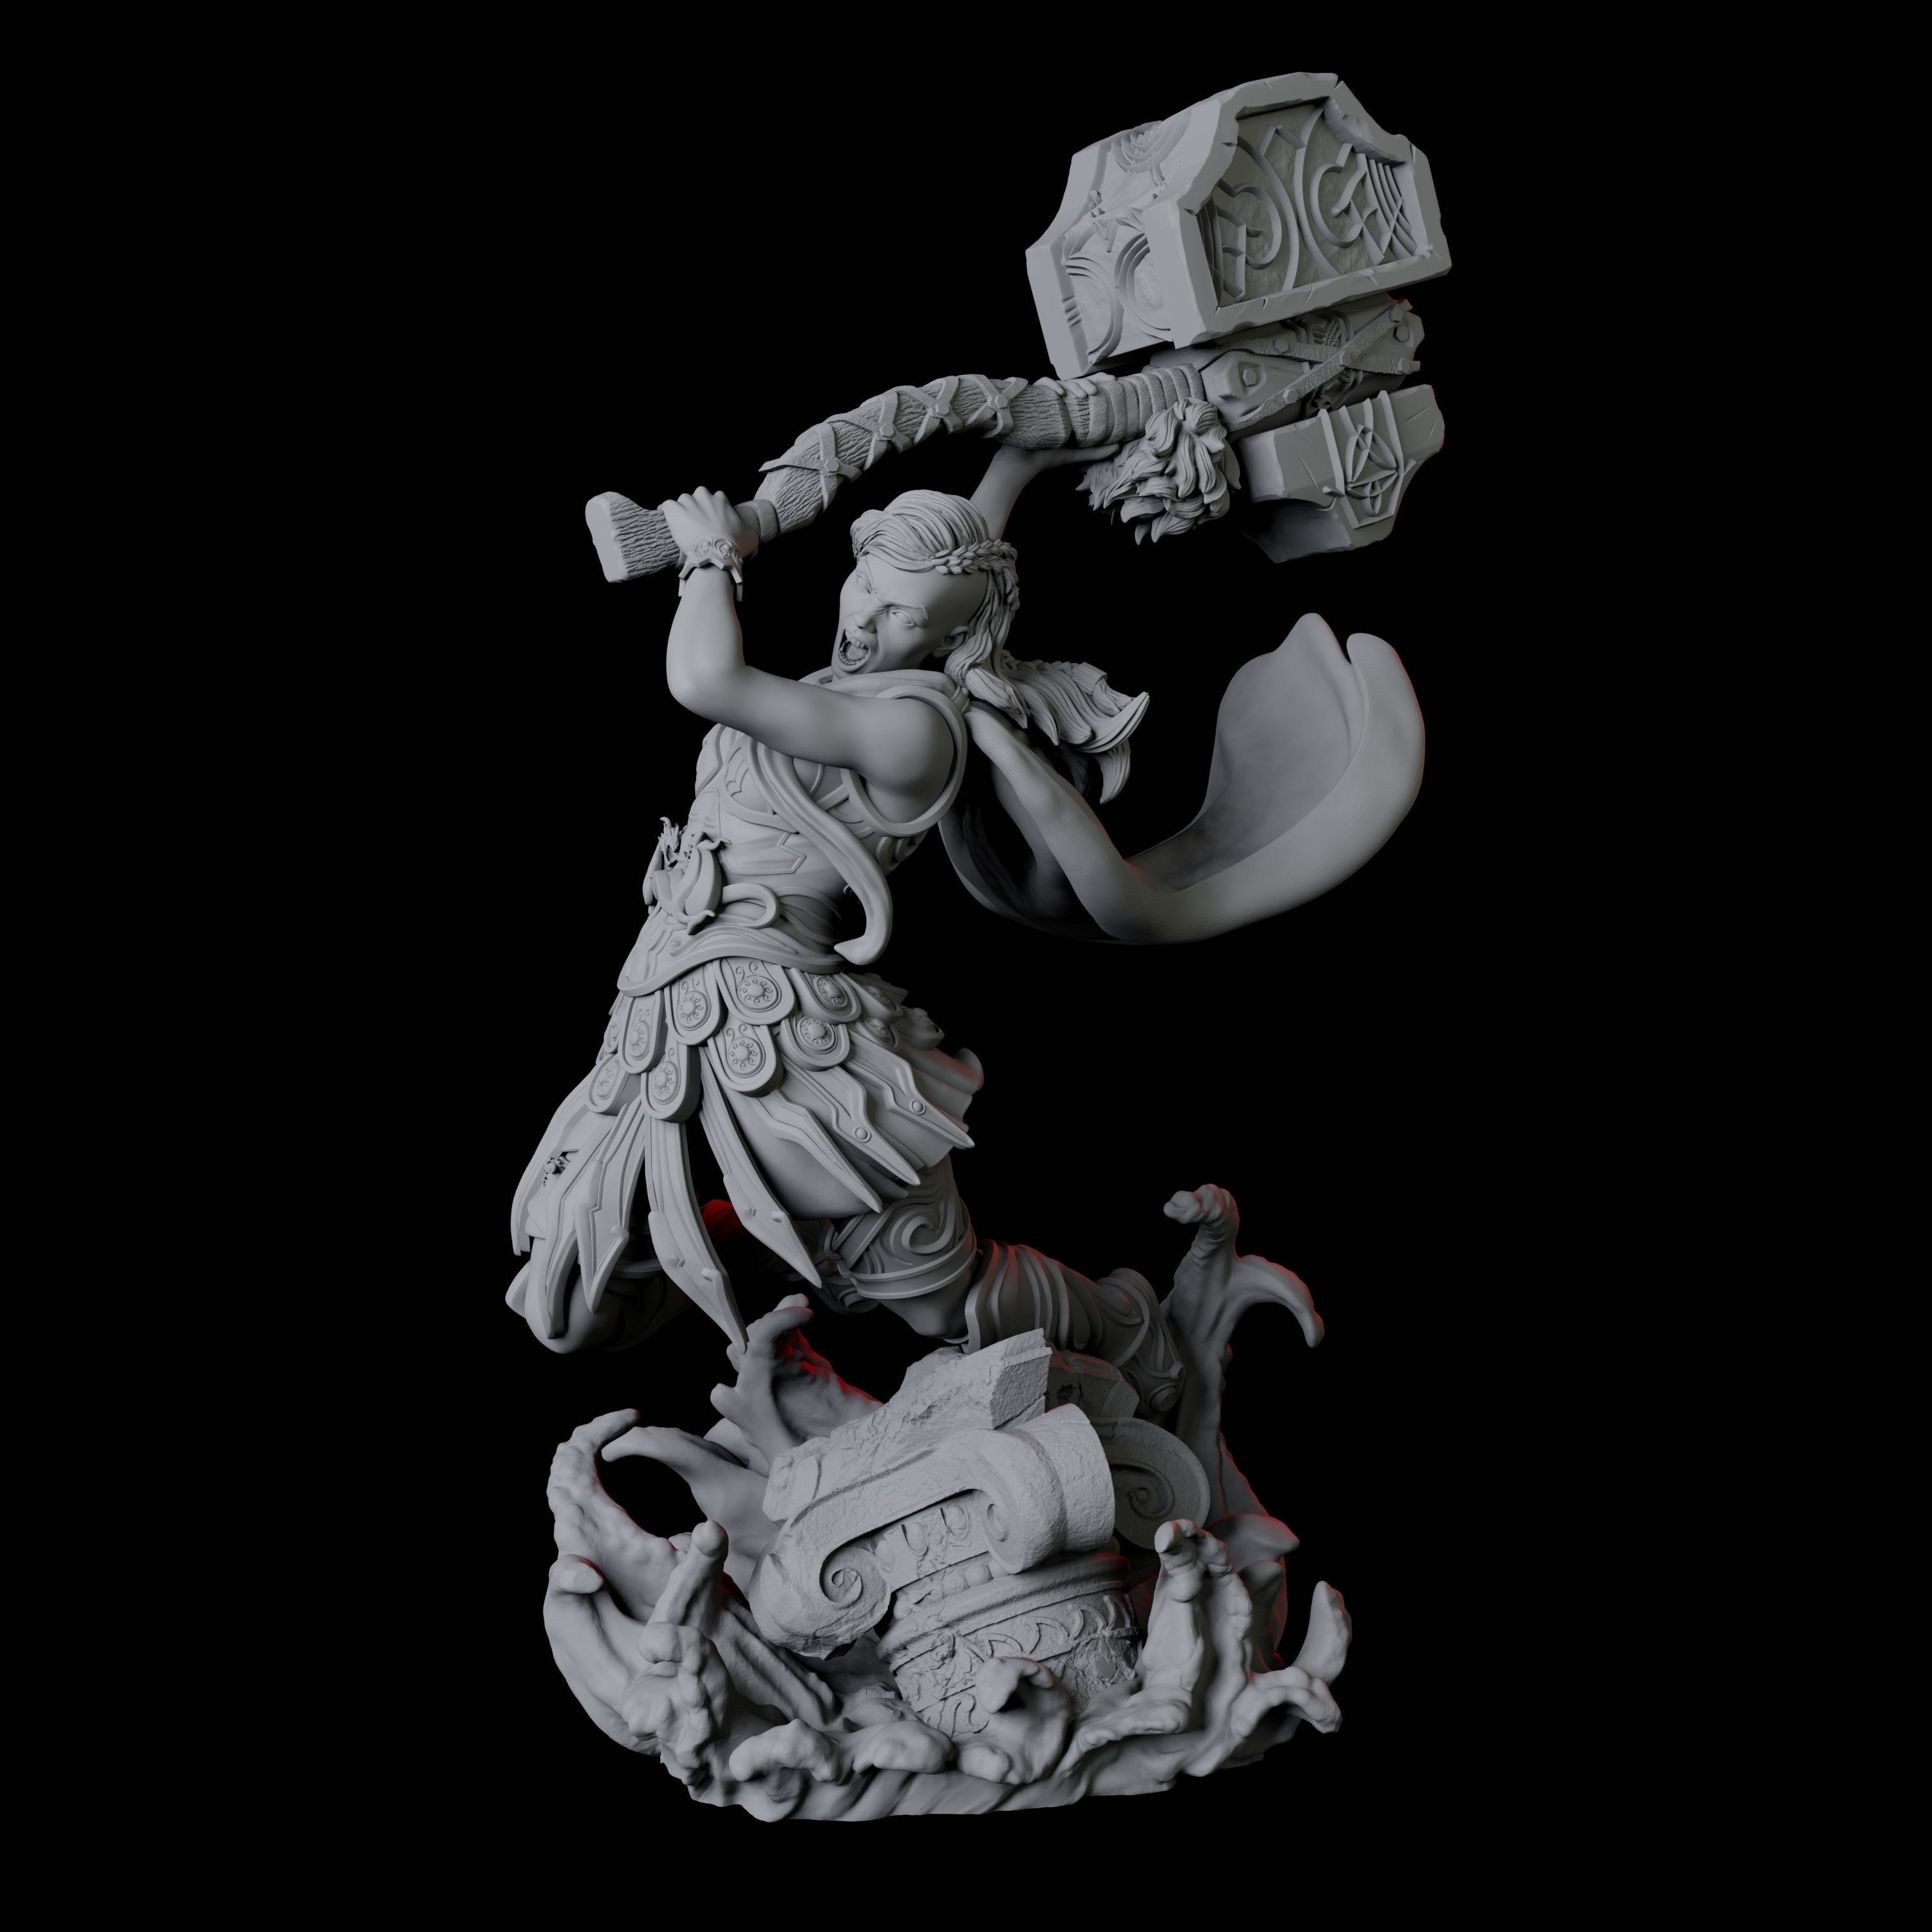 Battlemaiden Giantess B Miniature for Dungeons and Dragons, Pathfinder or other TTRPGs